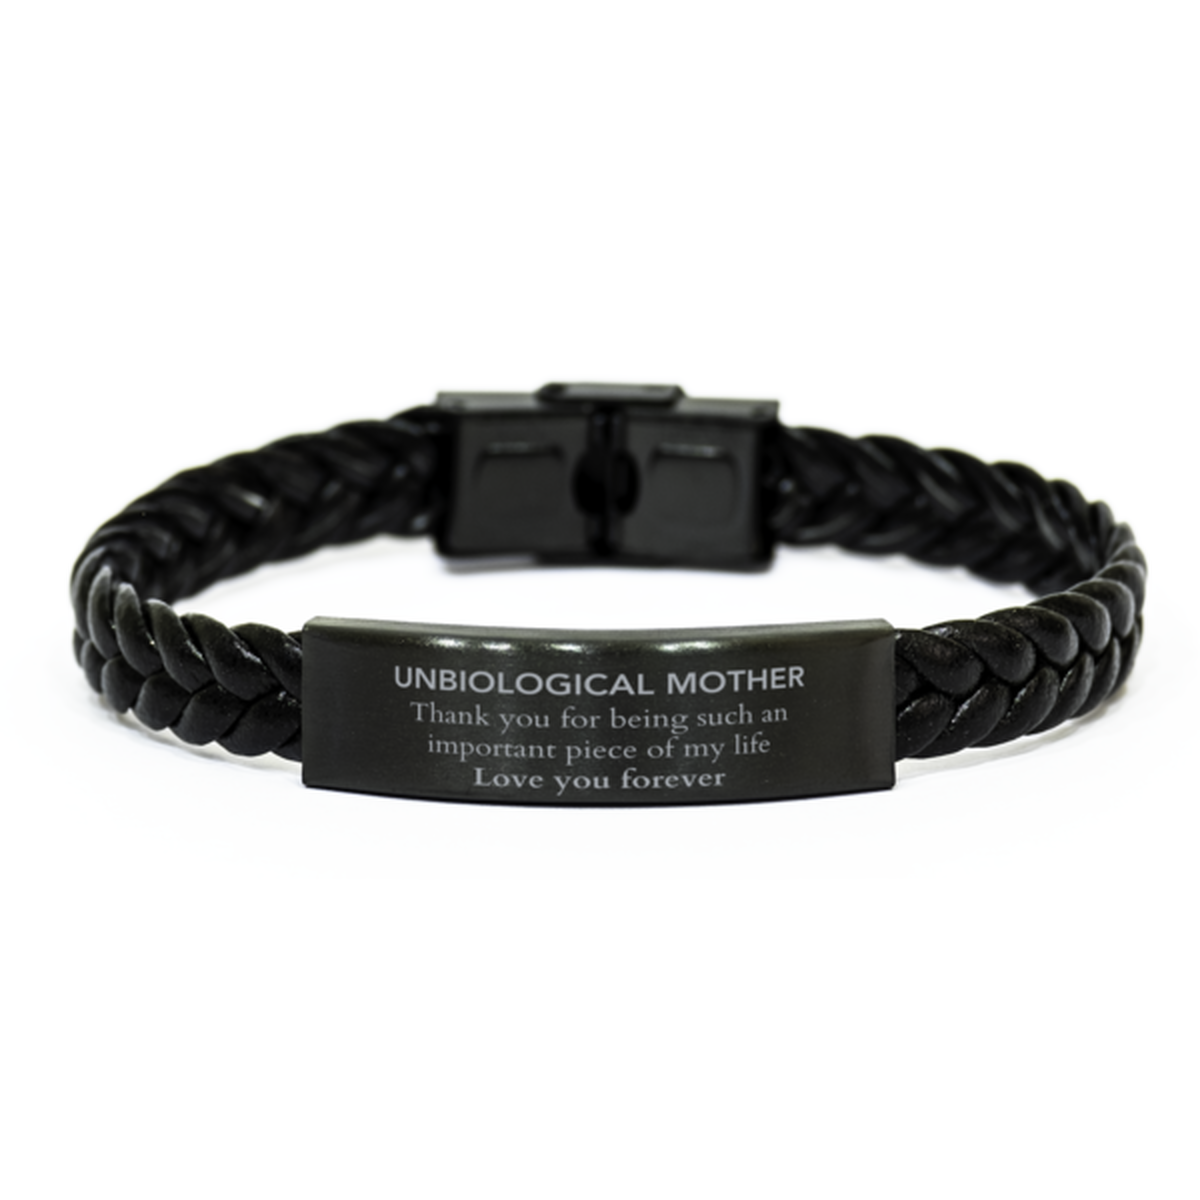 Appropriate Unbiological Mother Braided Leather Bracelet Epic Birthday Gifts for Unbiological Mother Thank you for being such an important piece of my life Unbiological Mother Christmas Mothers Fathers Day